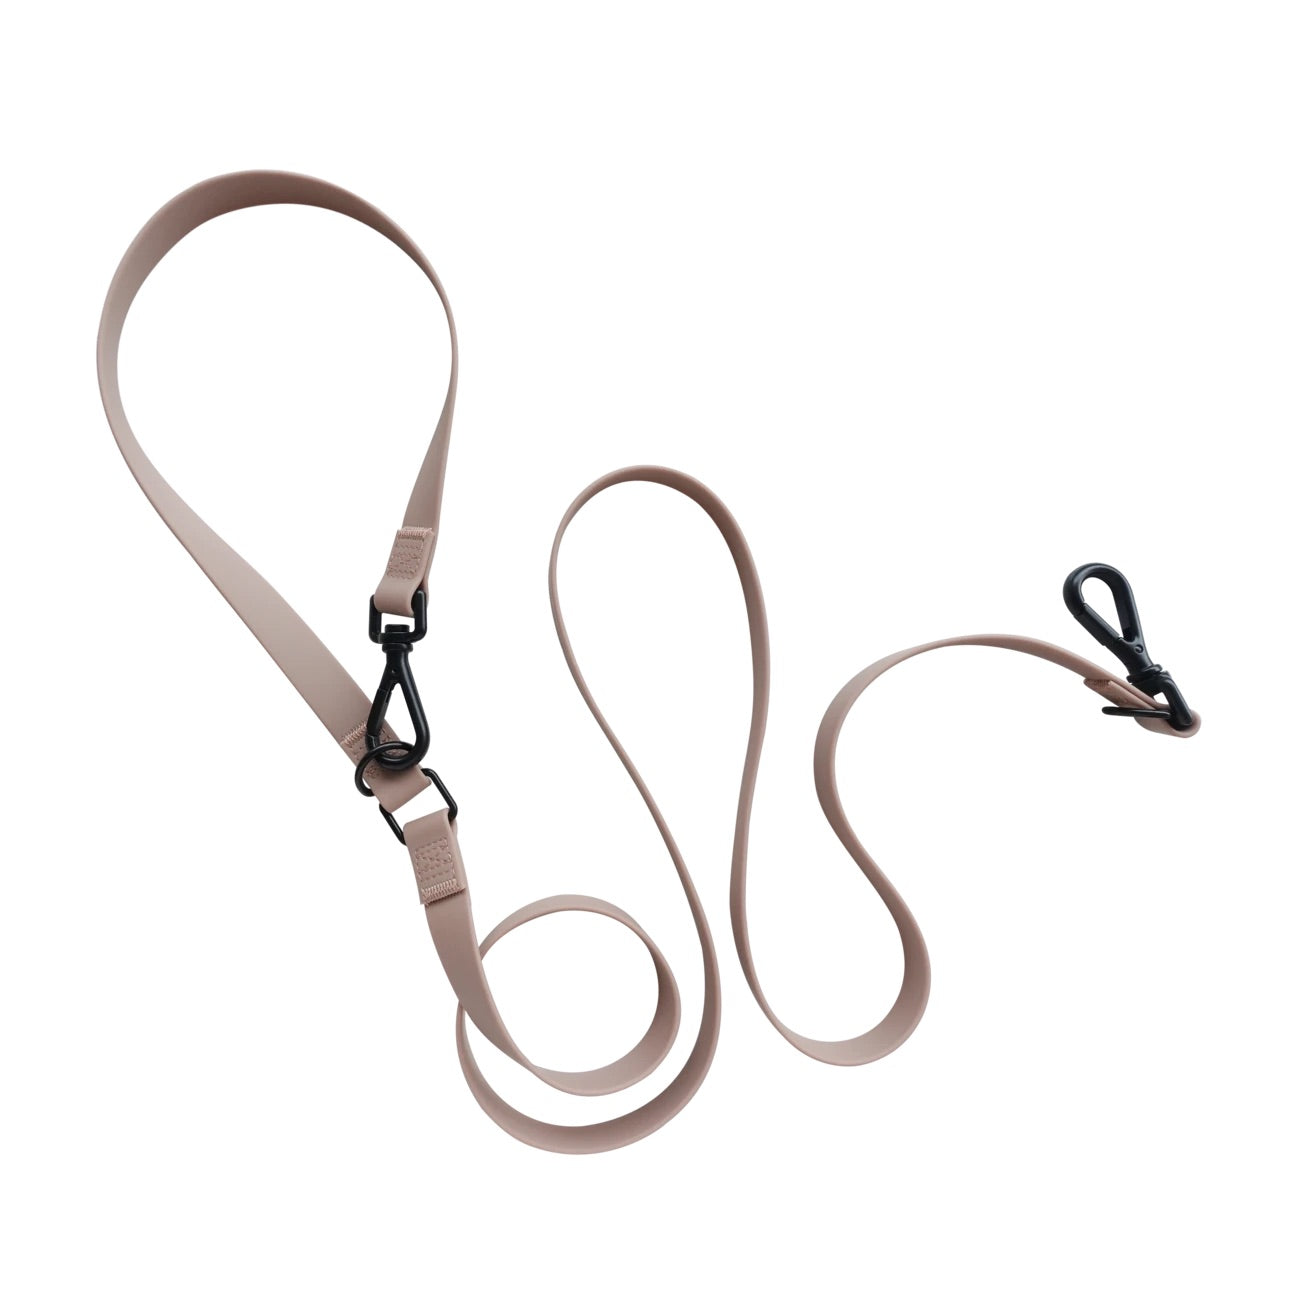 MELLEM narrow - 2cm wide // all weather convertible leash / 6ft or 180cm max